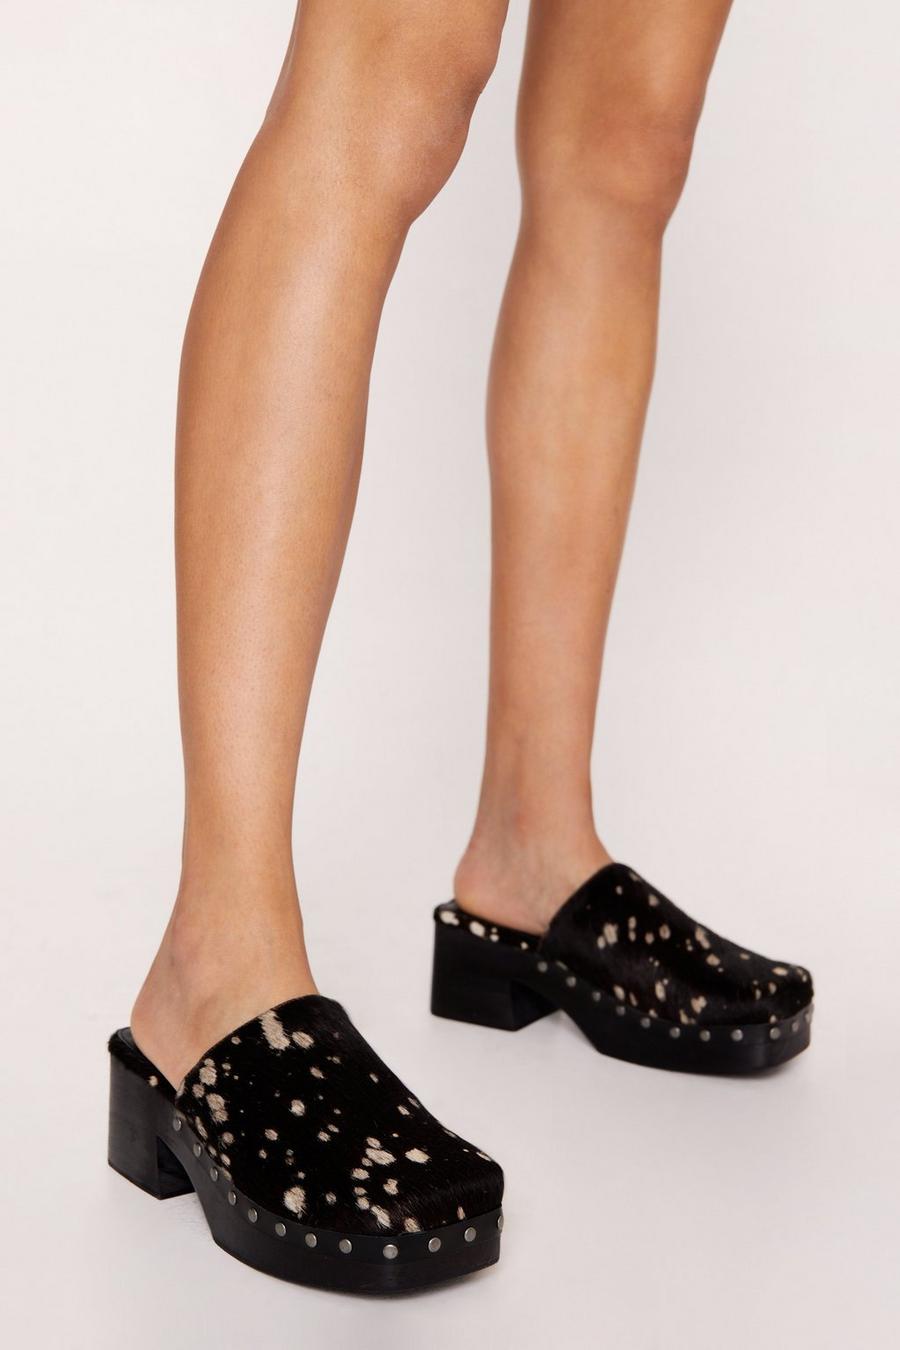 Brown Hair On Studded Square Toe Clogs